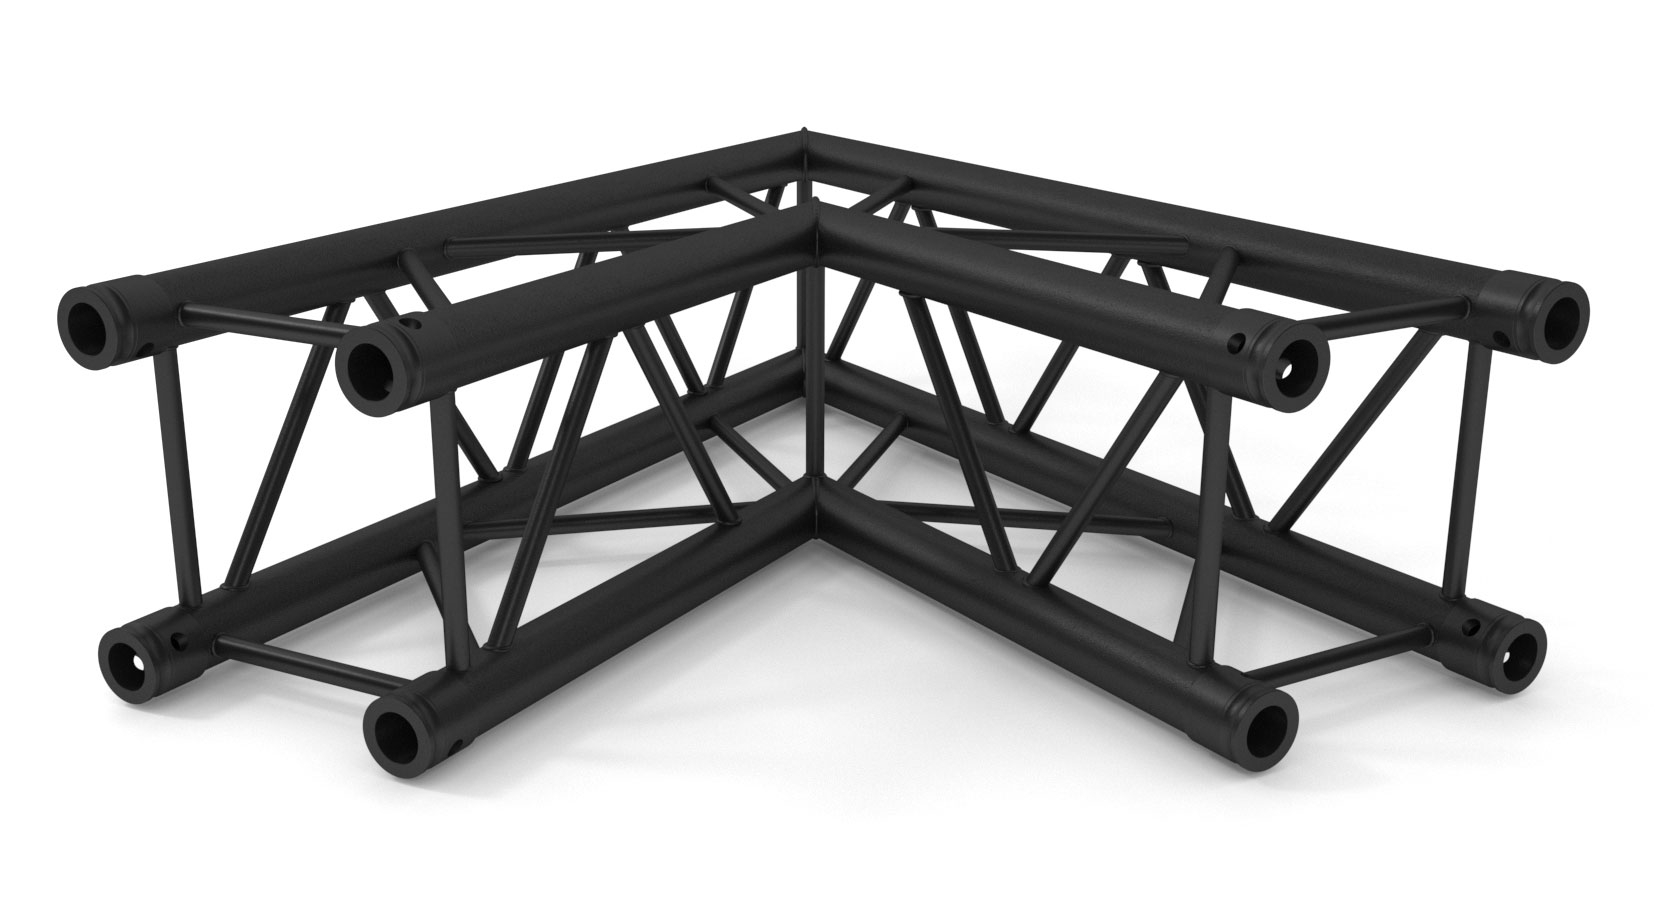 TRUSS Quatro 290 angle - 100cm - 60- - 2 directions  Black - Connection kit included